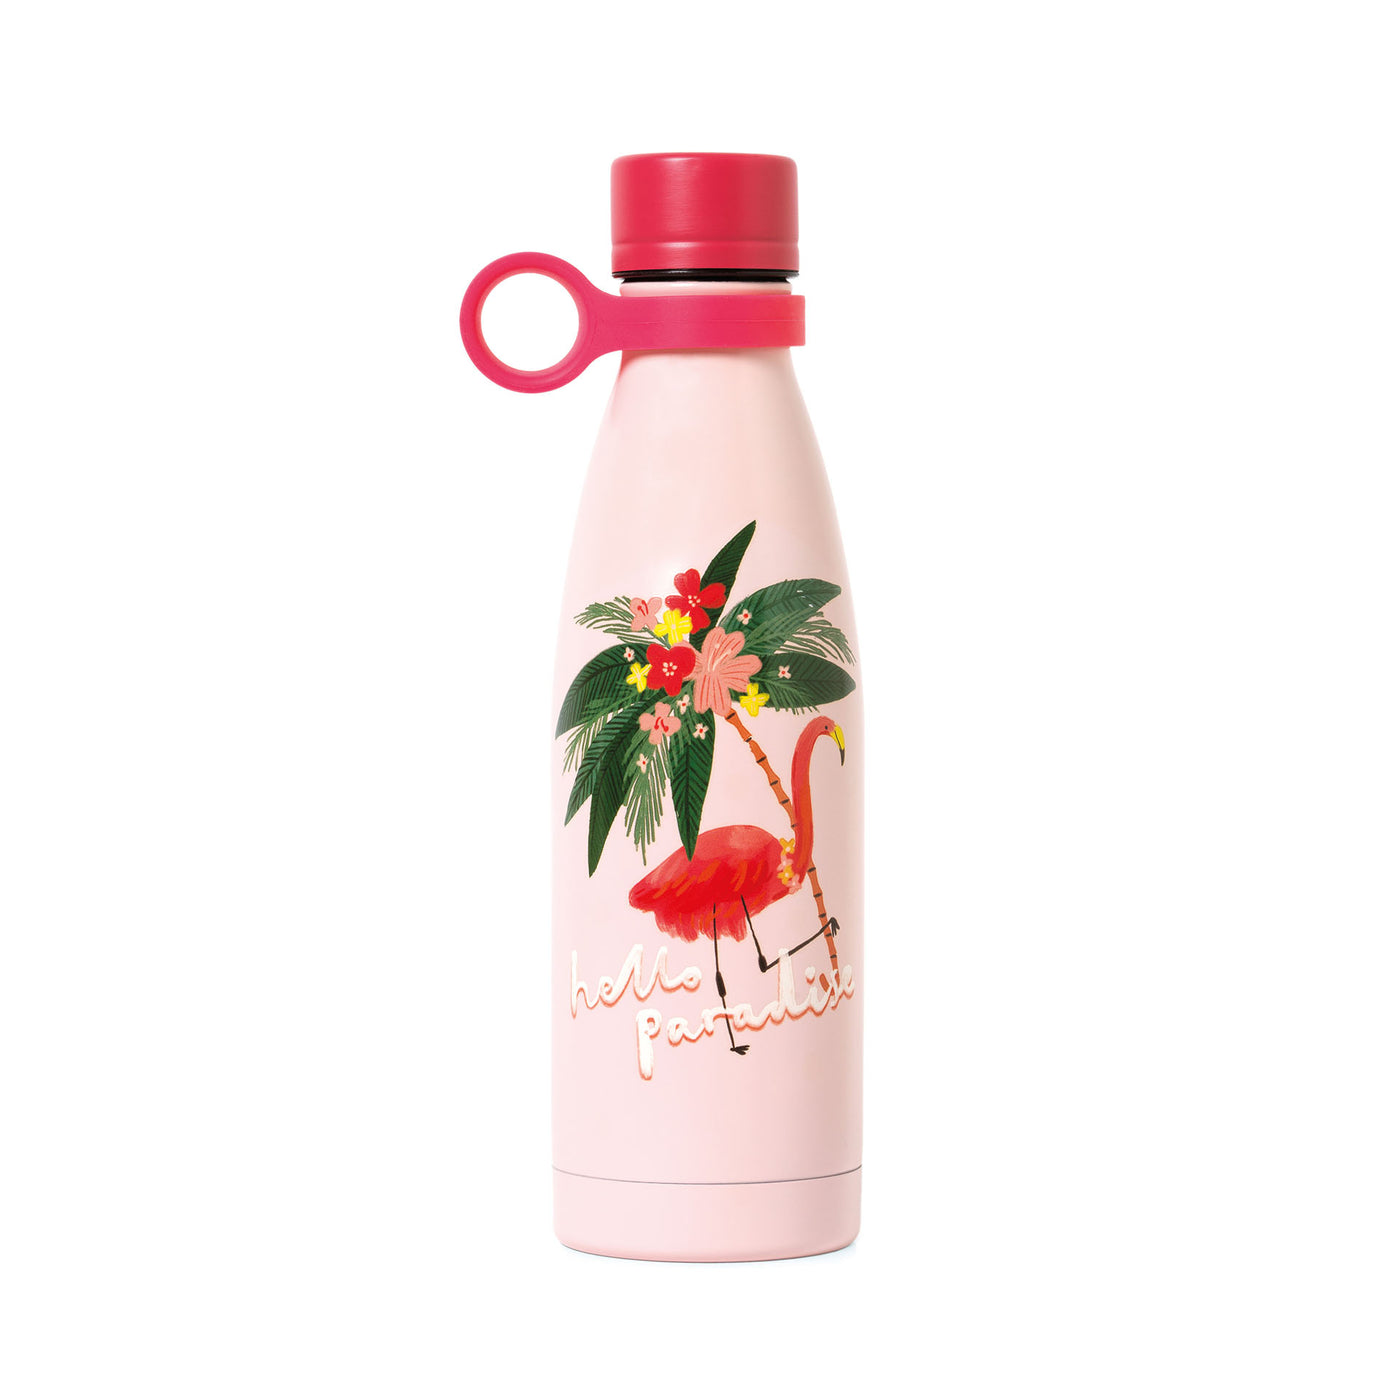 Legami Hot & Cold - 500 ml Vacuum Bottle Collection